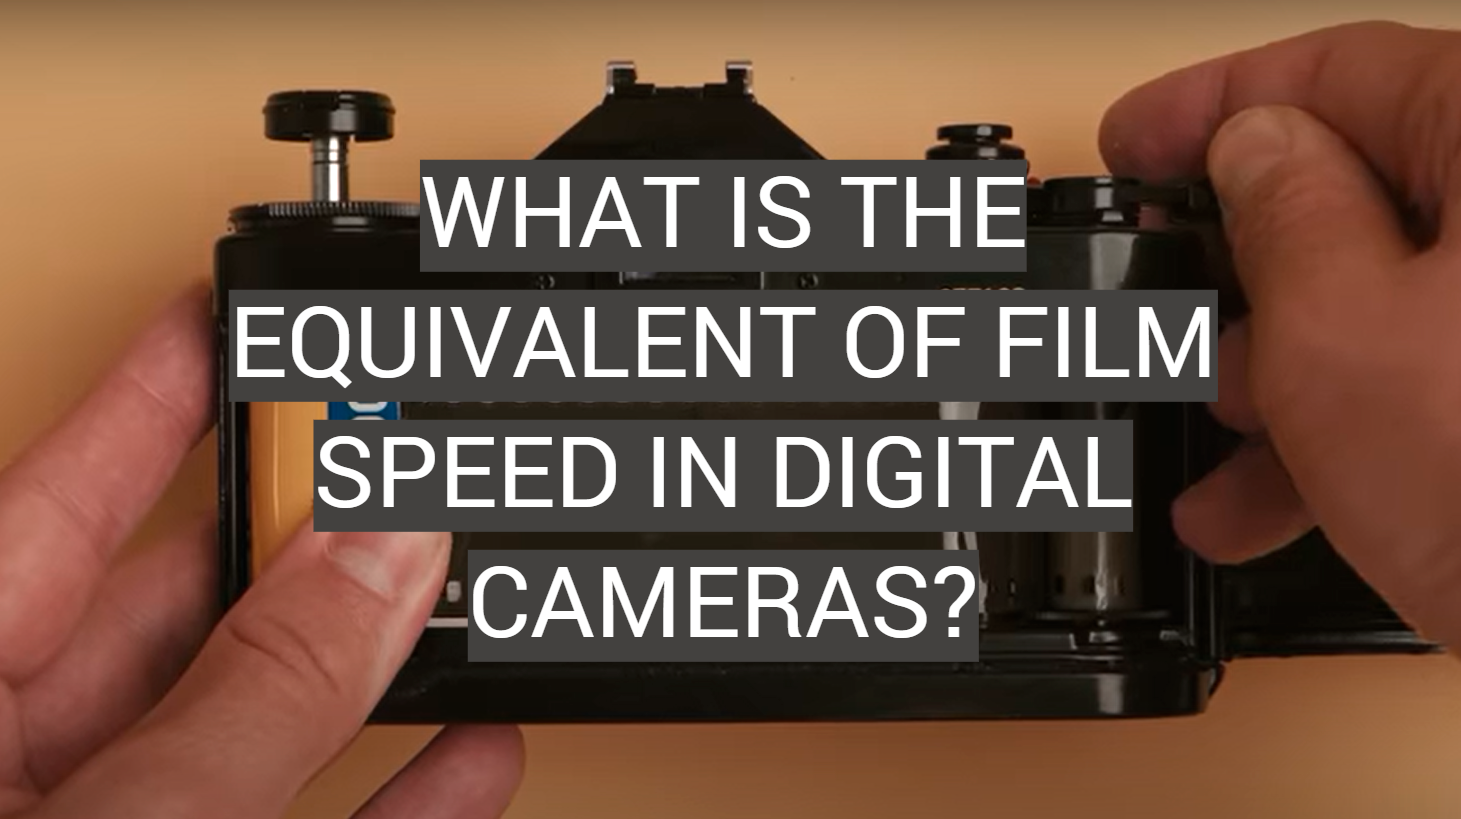 What Is the Equivalent of Film Speed in Digital Cameras?